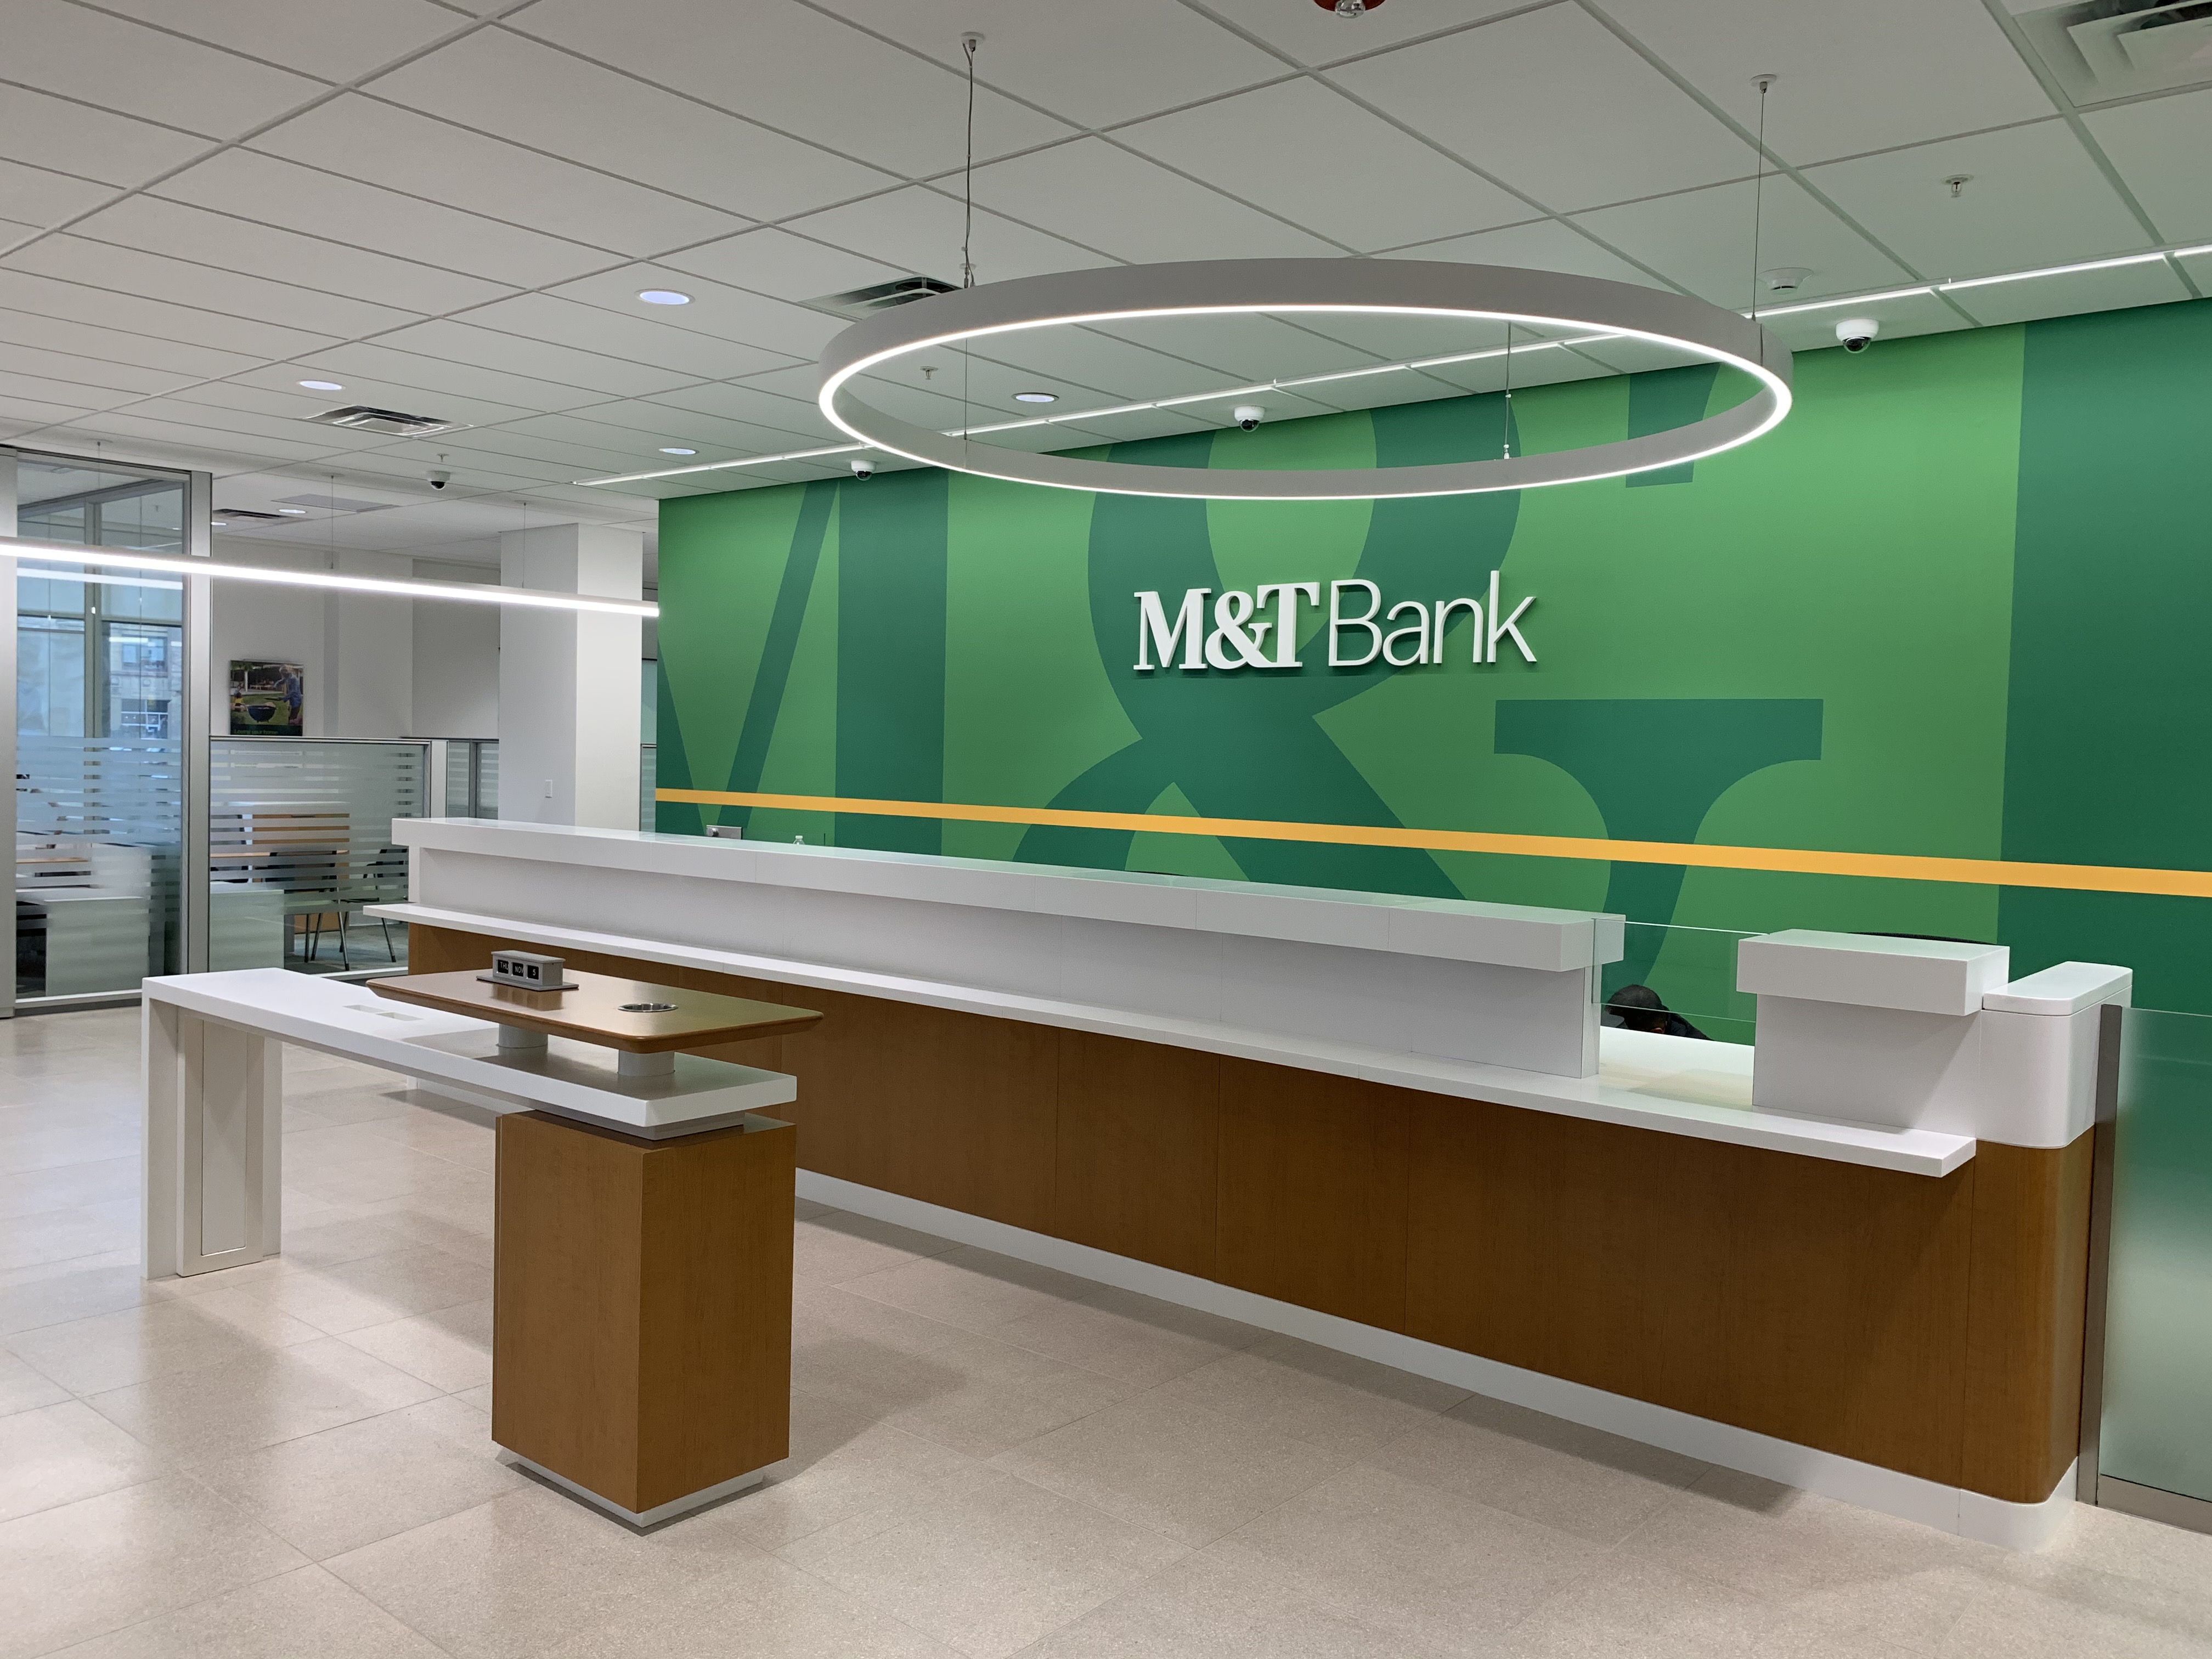 M&T Bank. T Bank. Банк Лайнс. Telephone Branch line. T me bank open ups